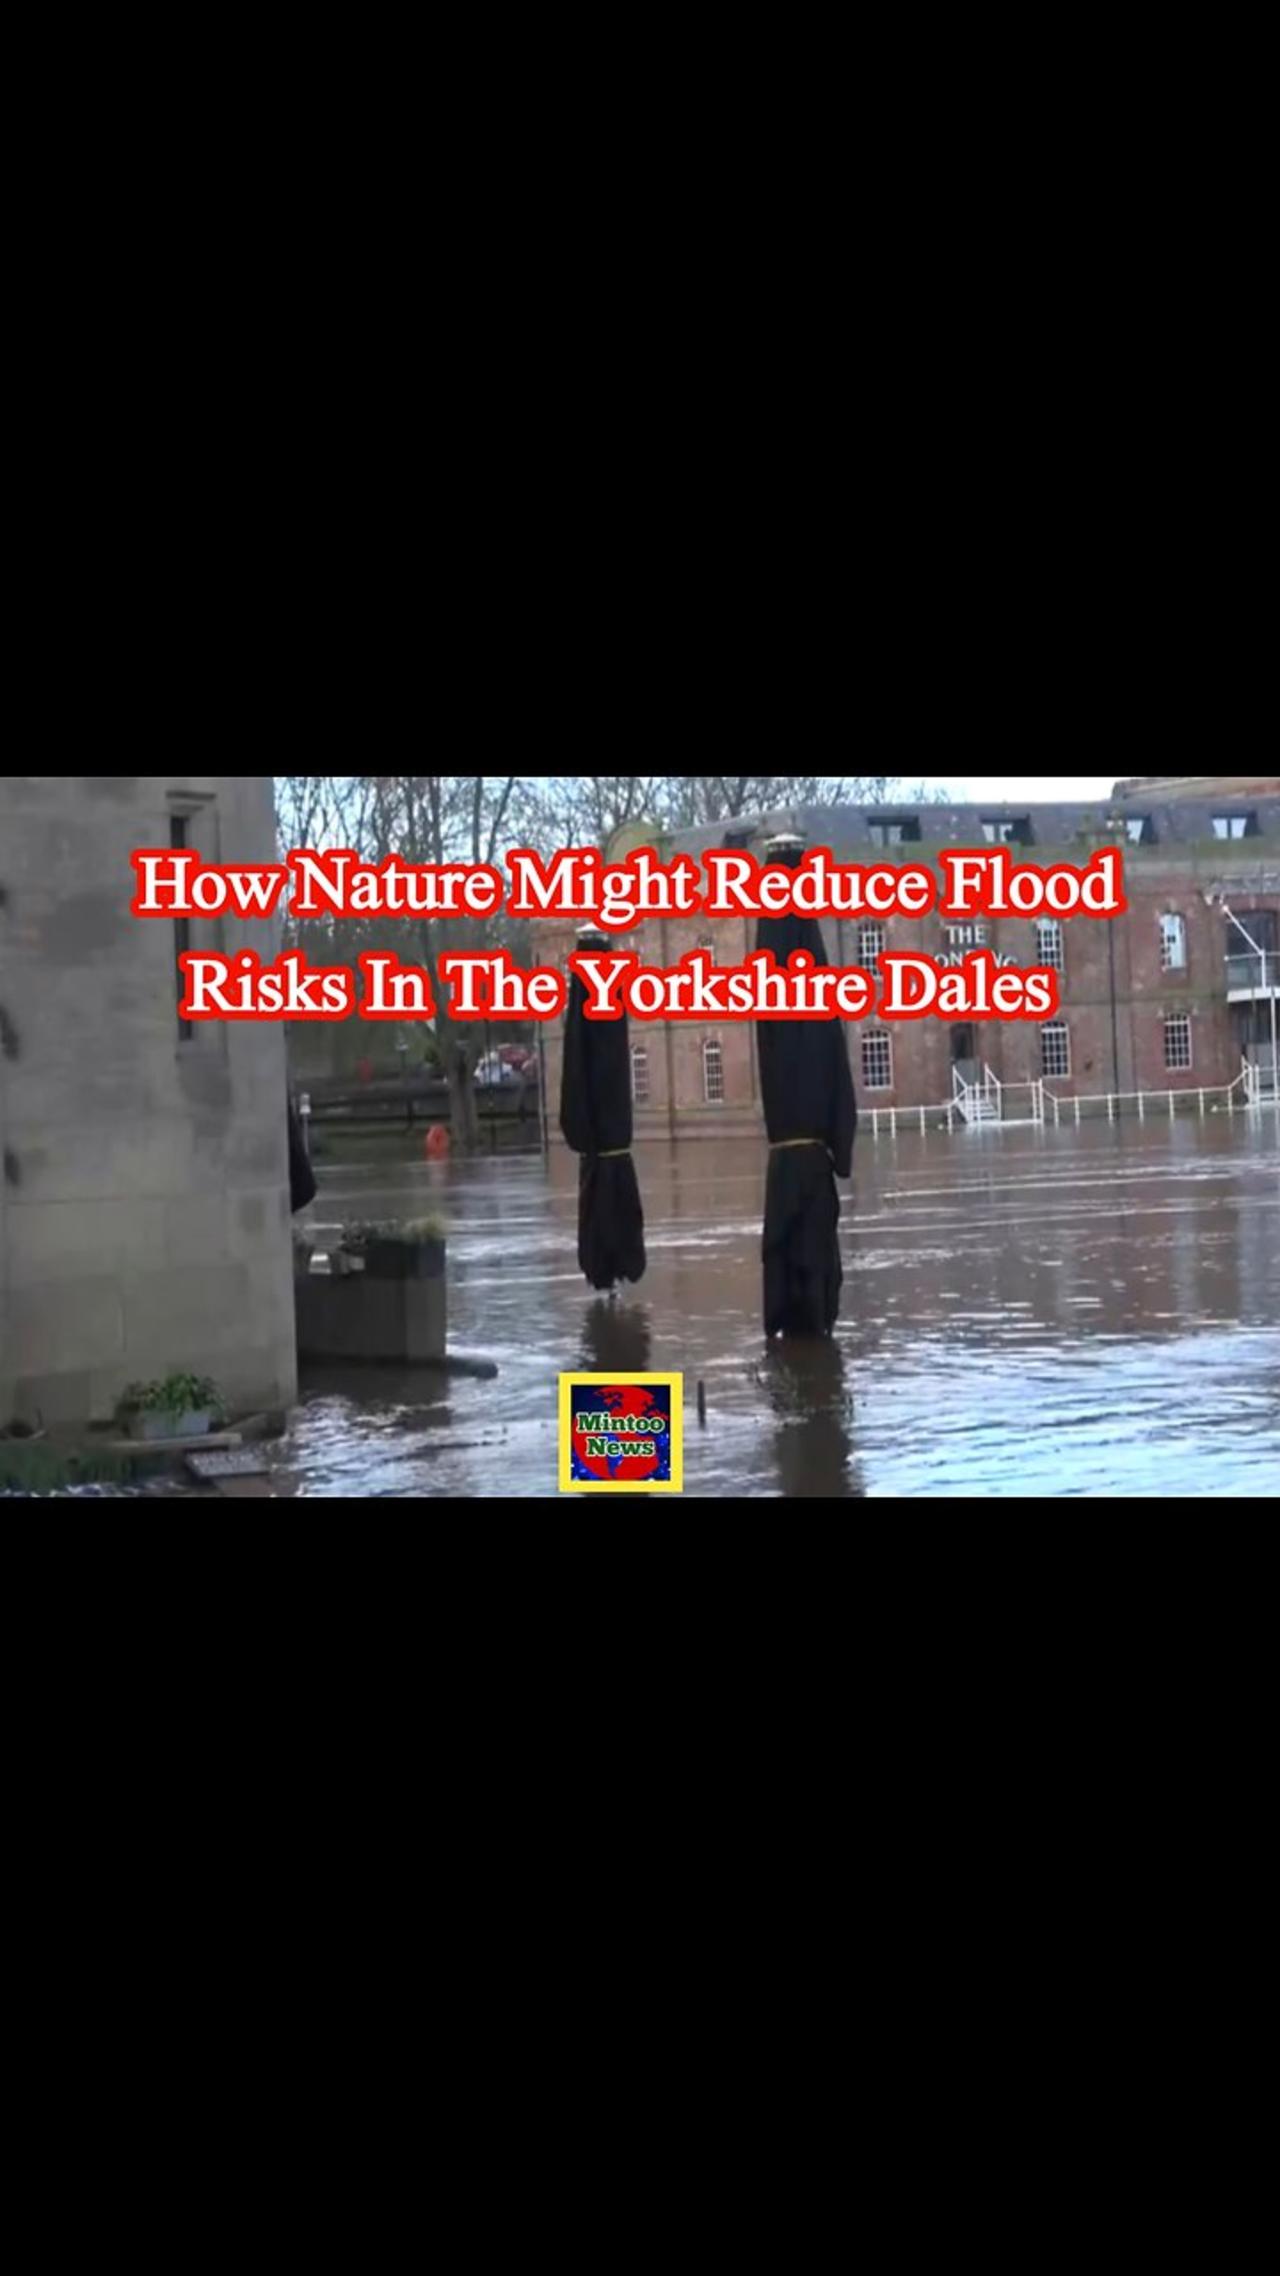 How nature might reduce flood risks in the Yorkshire Dales